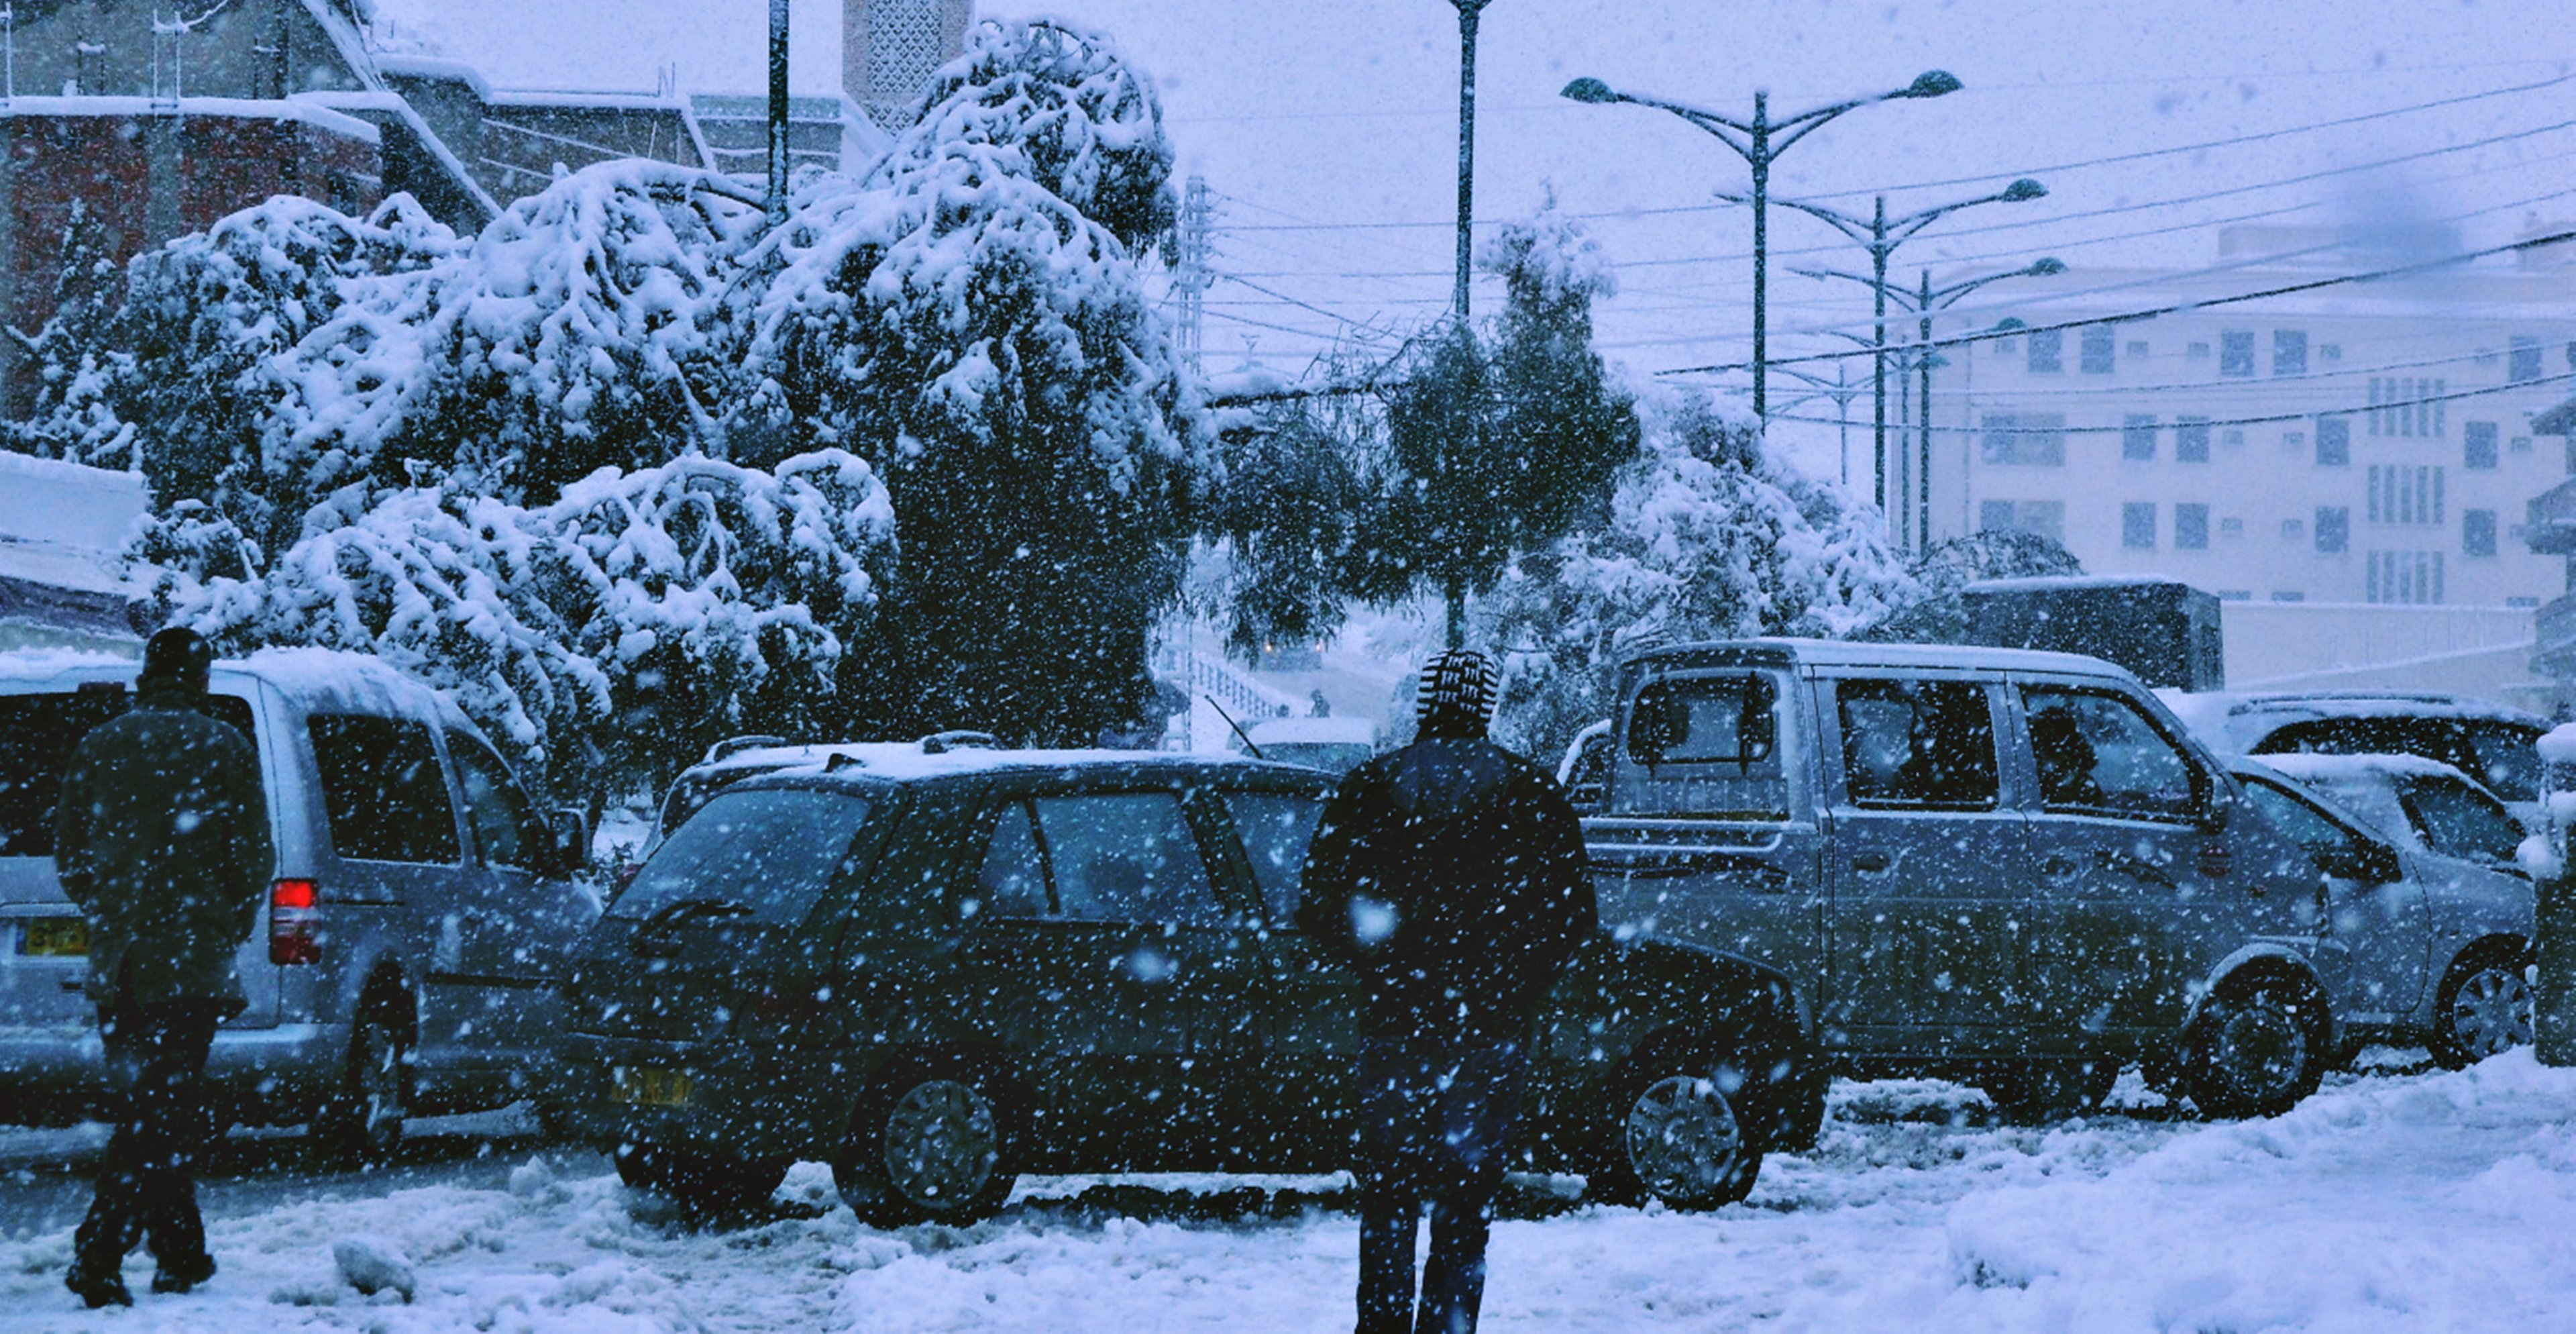 snow, Heavy, Trees, Winter, Landscapes, Houses, City, Tebessa, Africa, North, Algeria, Cold, Cars, City Wallpaper